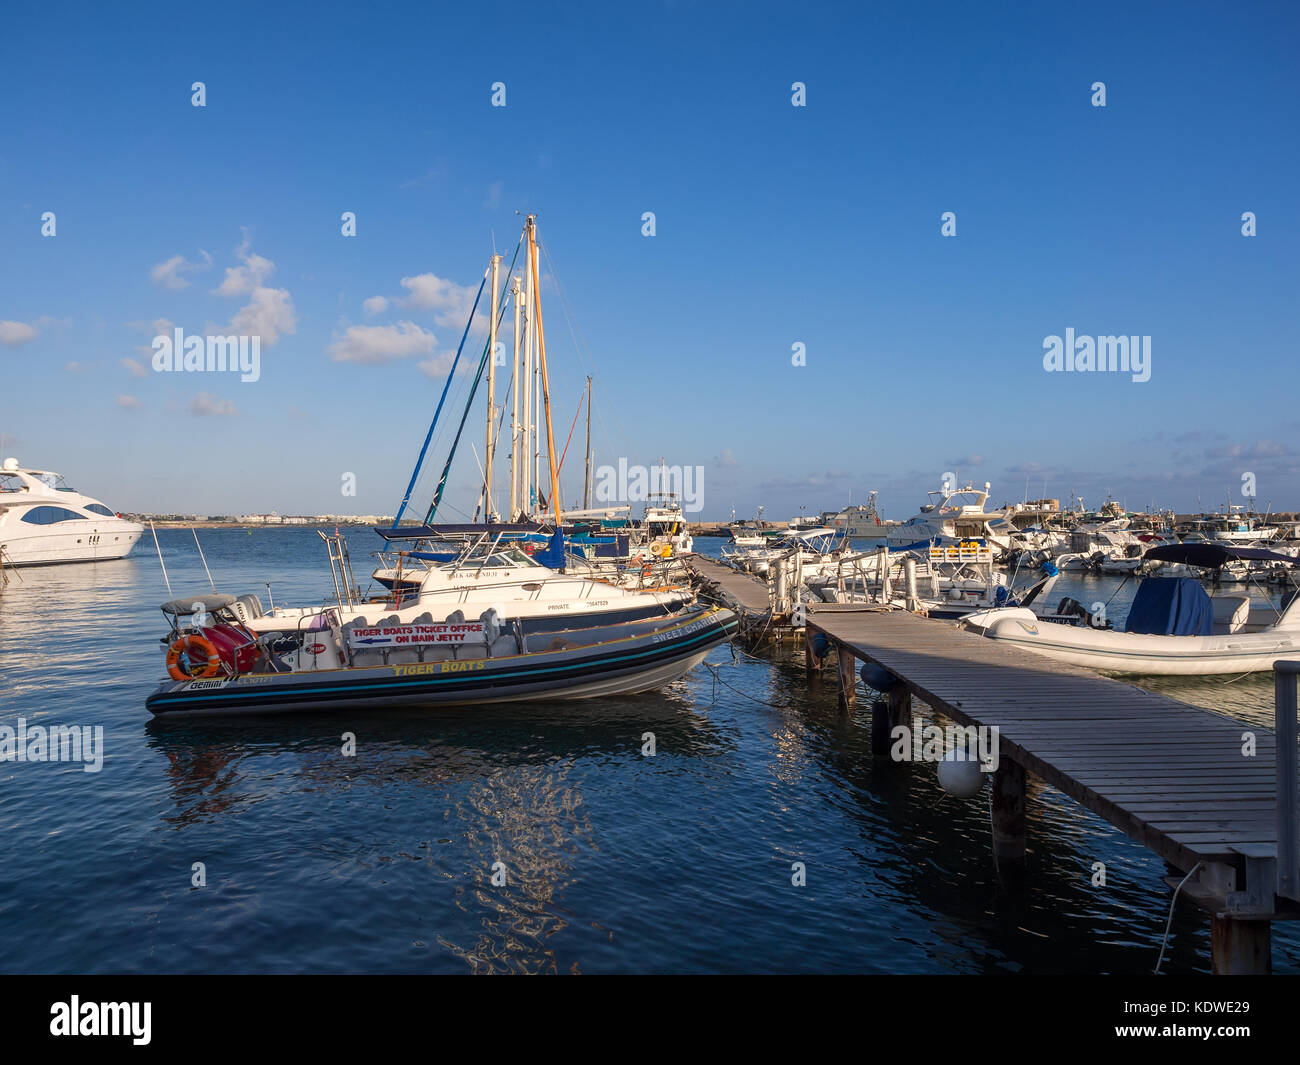 Paphos, Cyprus - July 18, 2016: Recreational boats and yachts moored at a harbor Stock Photo